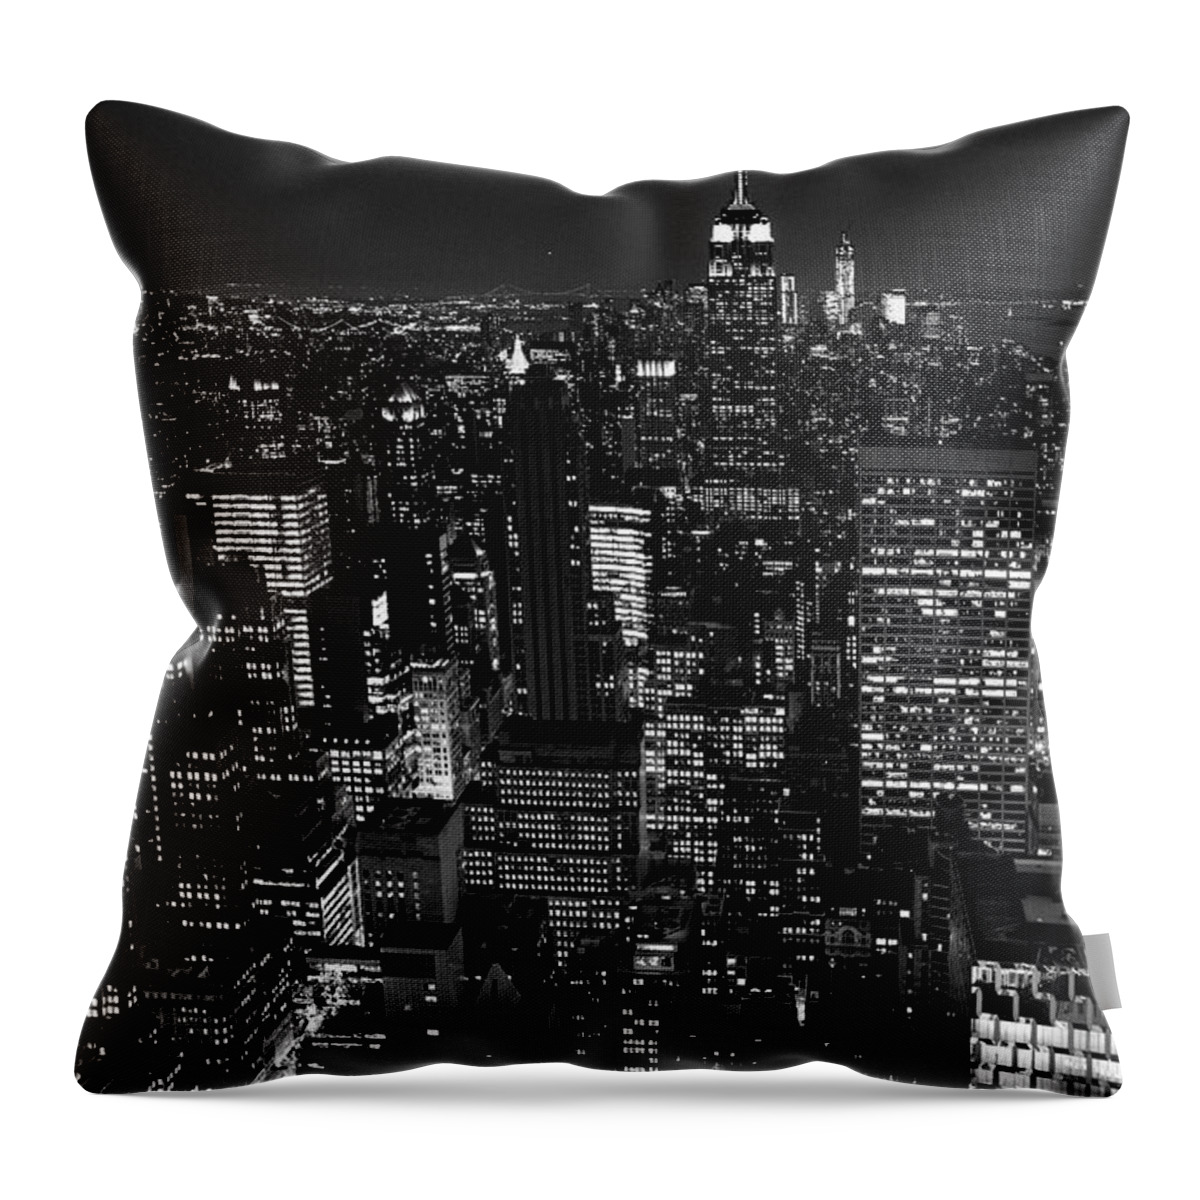 Outdoors Throw Pillow featuring the photograph Manhattan Skyline At Night, New York by Mike Hill